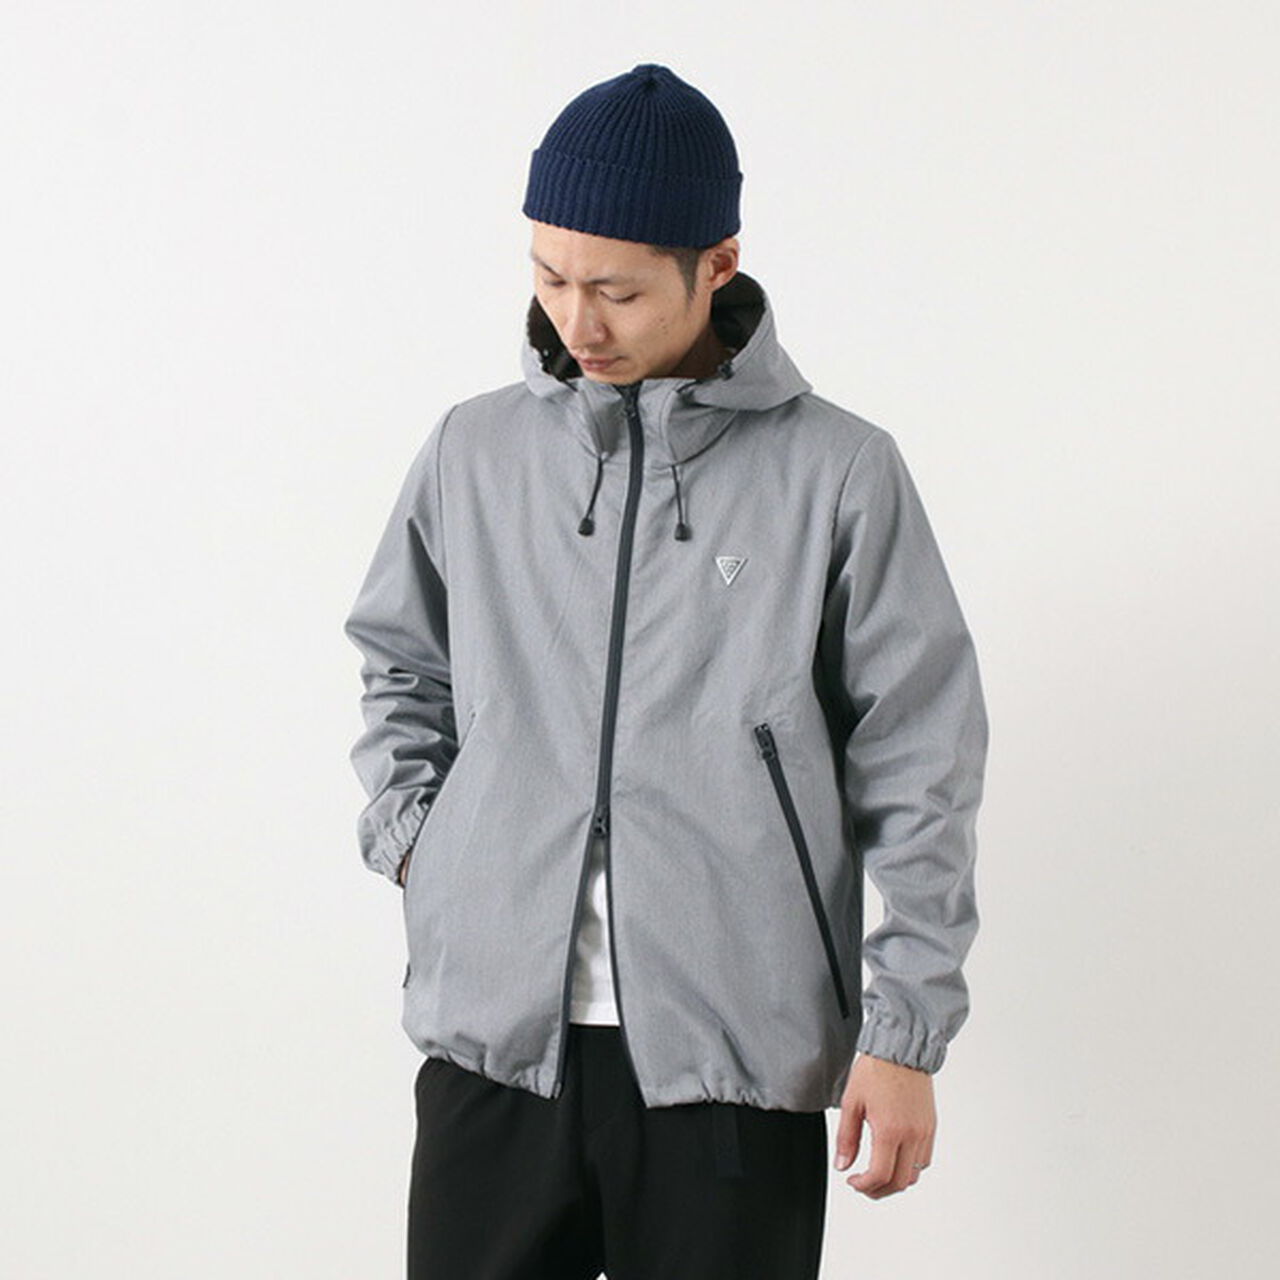 Go Out Tech Jacket,Grey, large image number 0